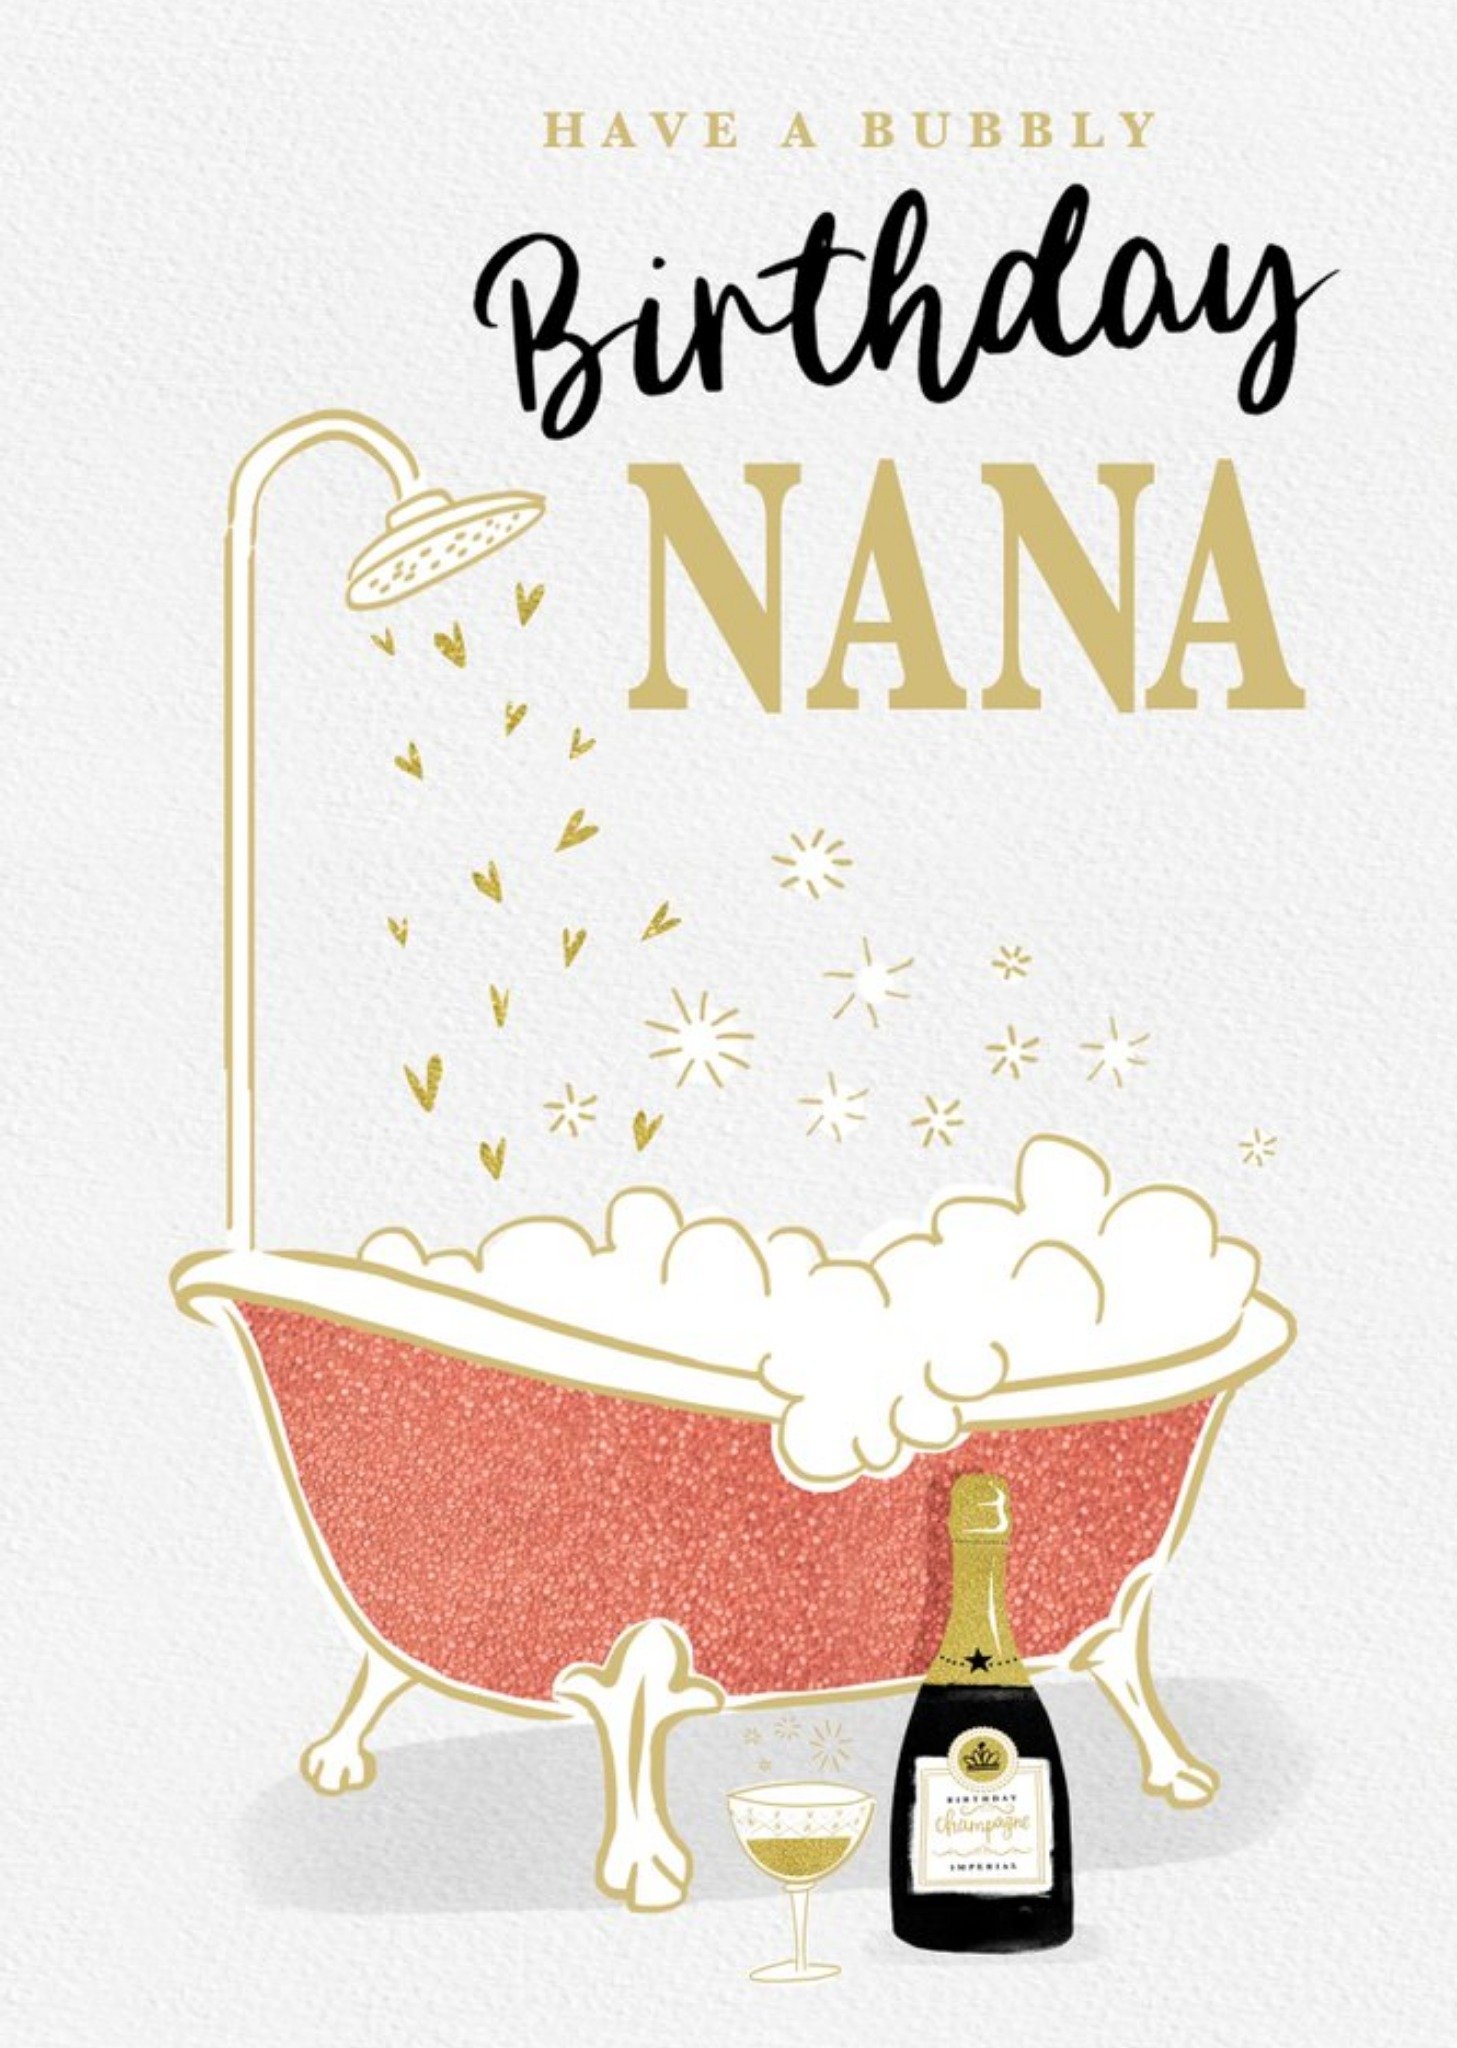 Moonpig Illustration Of A Bubble Bath With A Bottle Of Bubbly Nana's Birthday Card Ecard